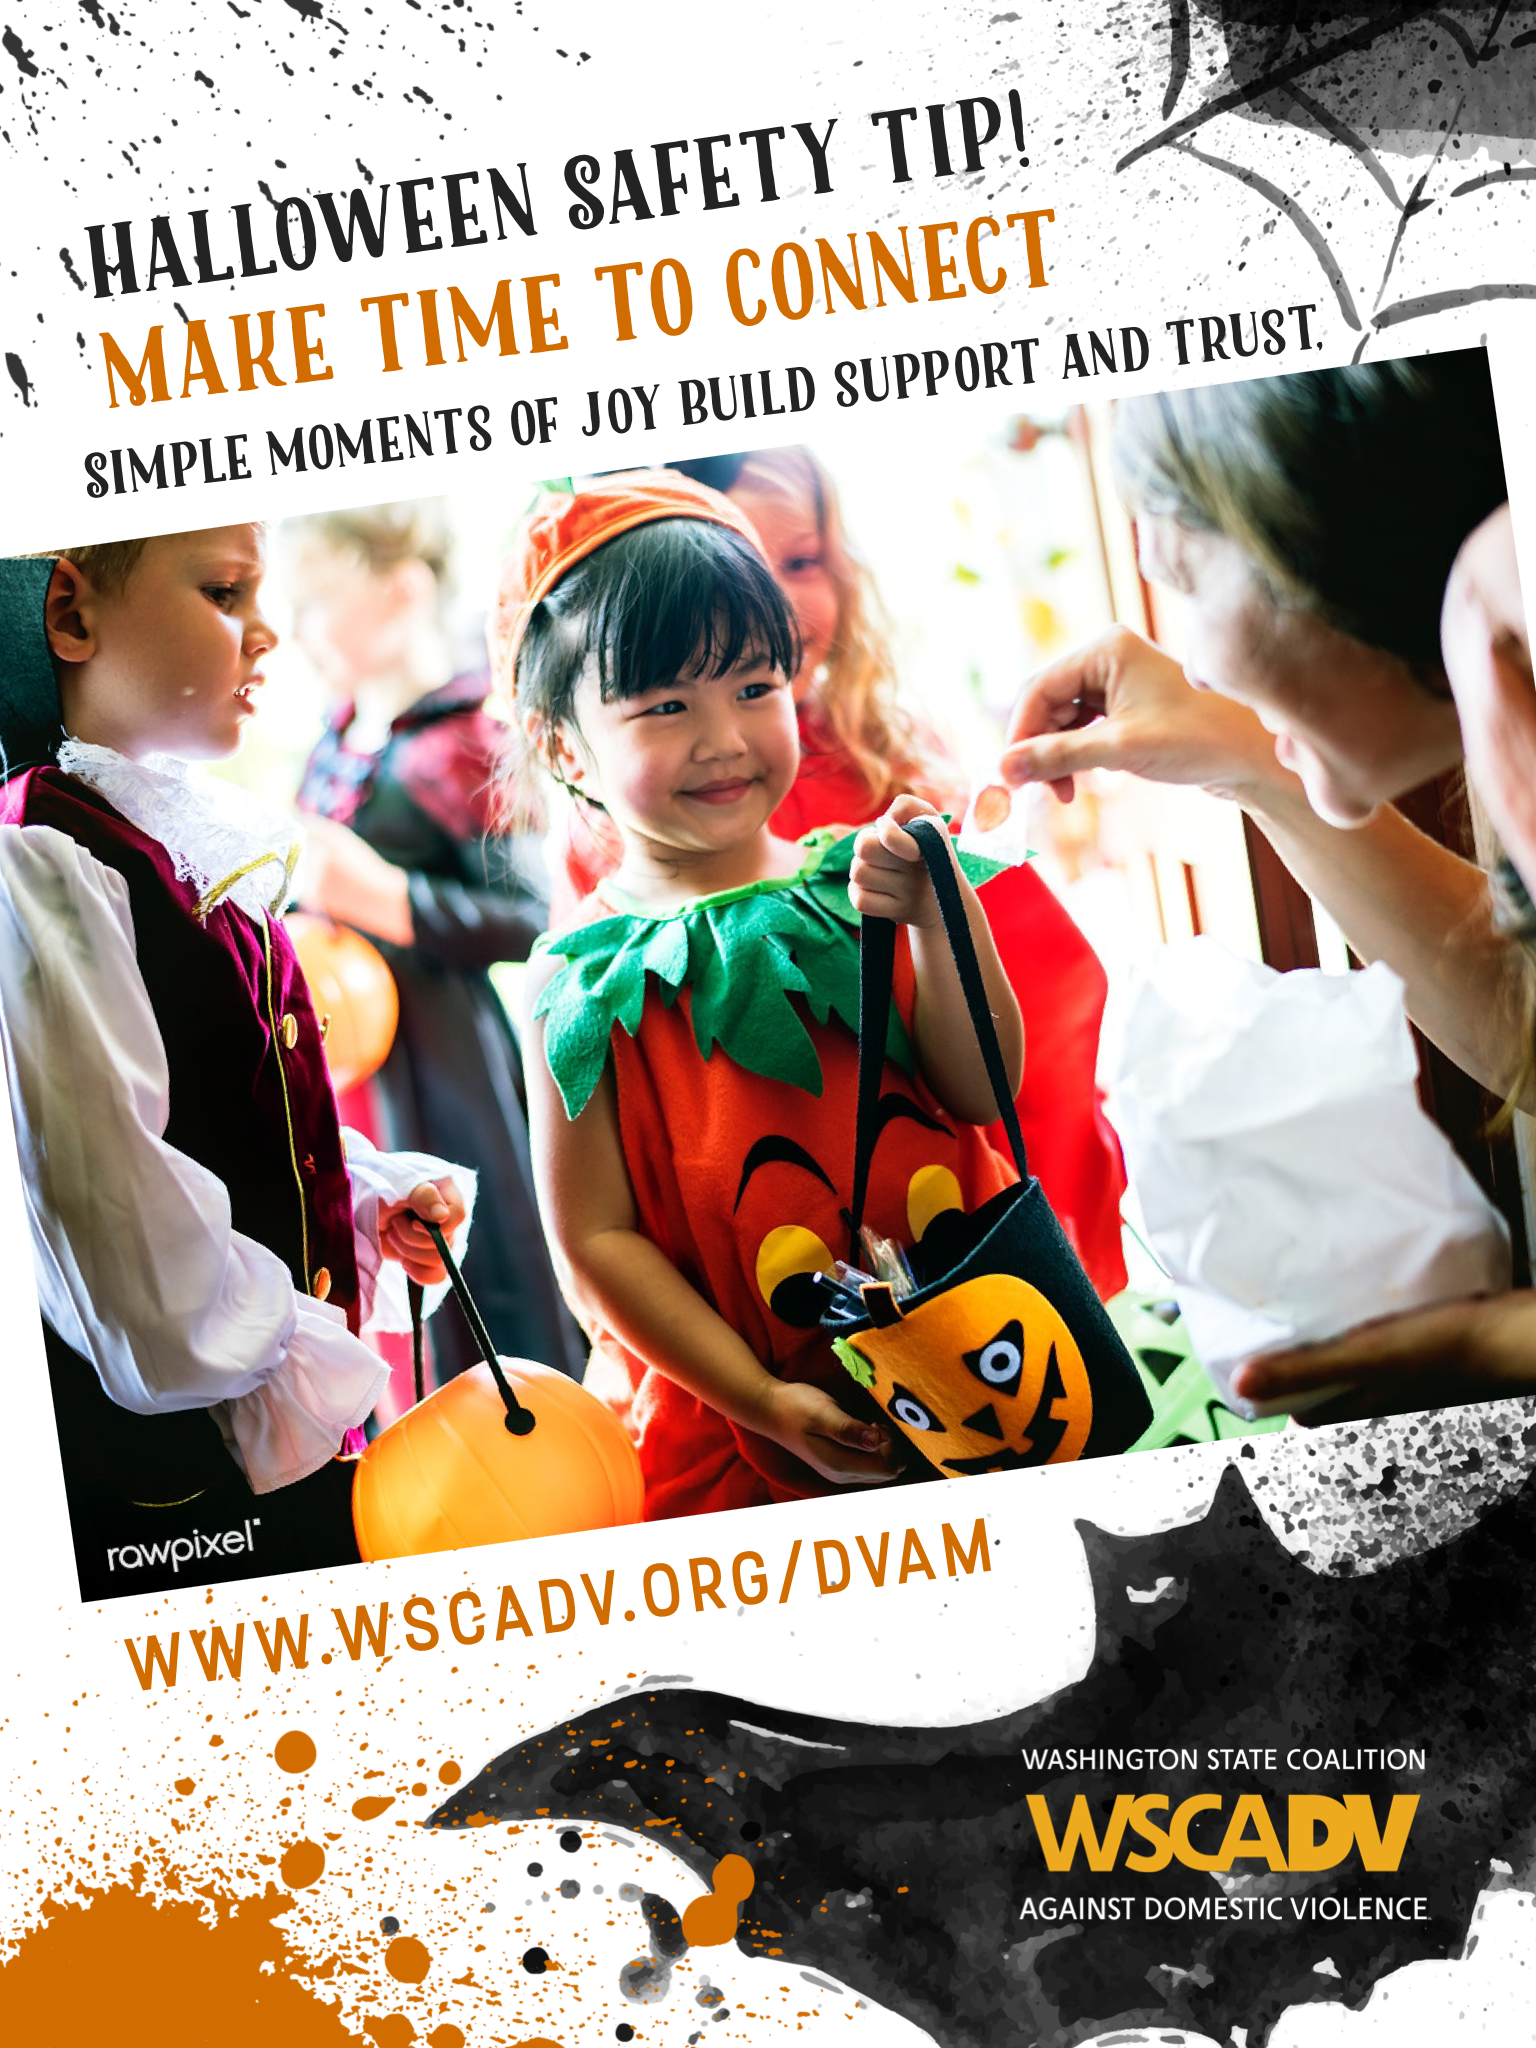 Halloween themed image for Domestic Violence Action Month. There is a photo of a group of children in halloween costumes smiling as they trick or treat. Above the photo is text that reads: Halloween safety tip! Make time to connect. Simple moments of joy build support and trust. Underneath the photo is a bat and the url www.wscadv.org/dvam